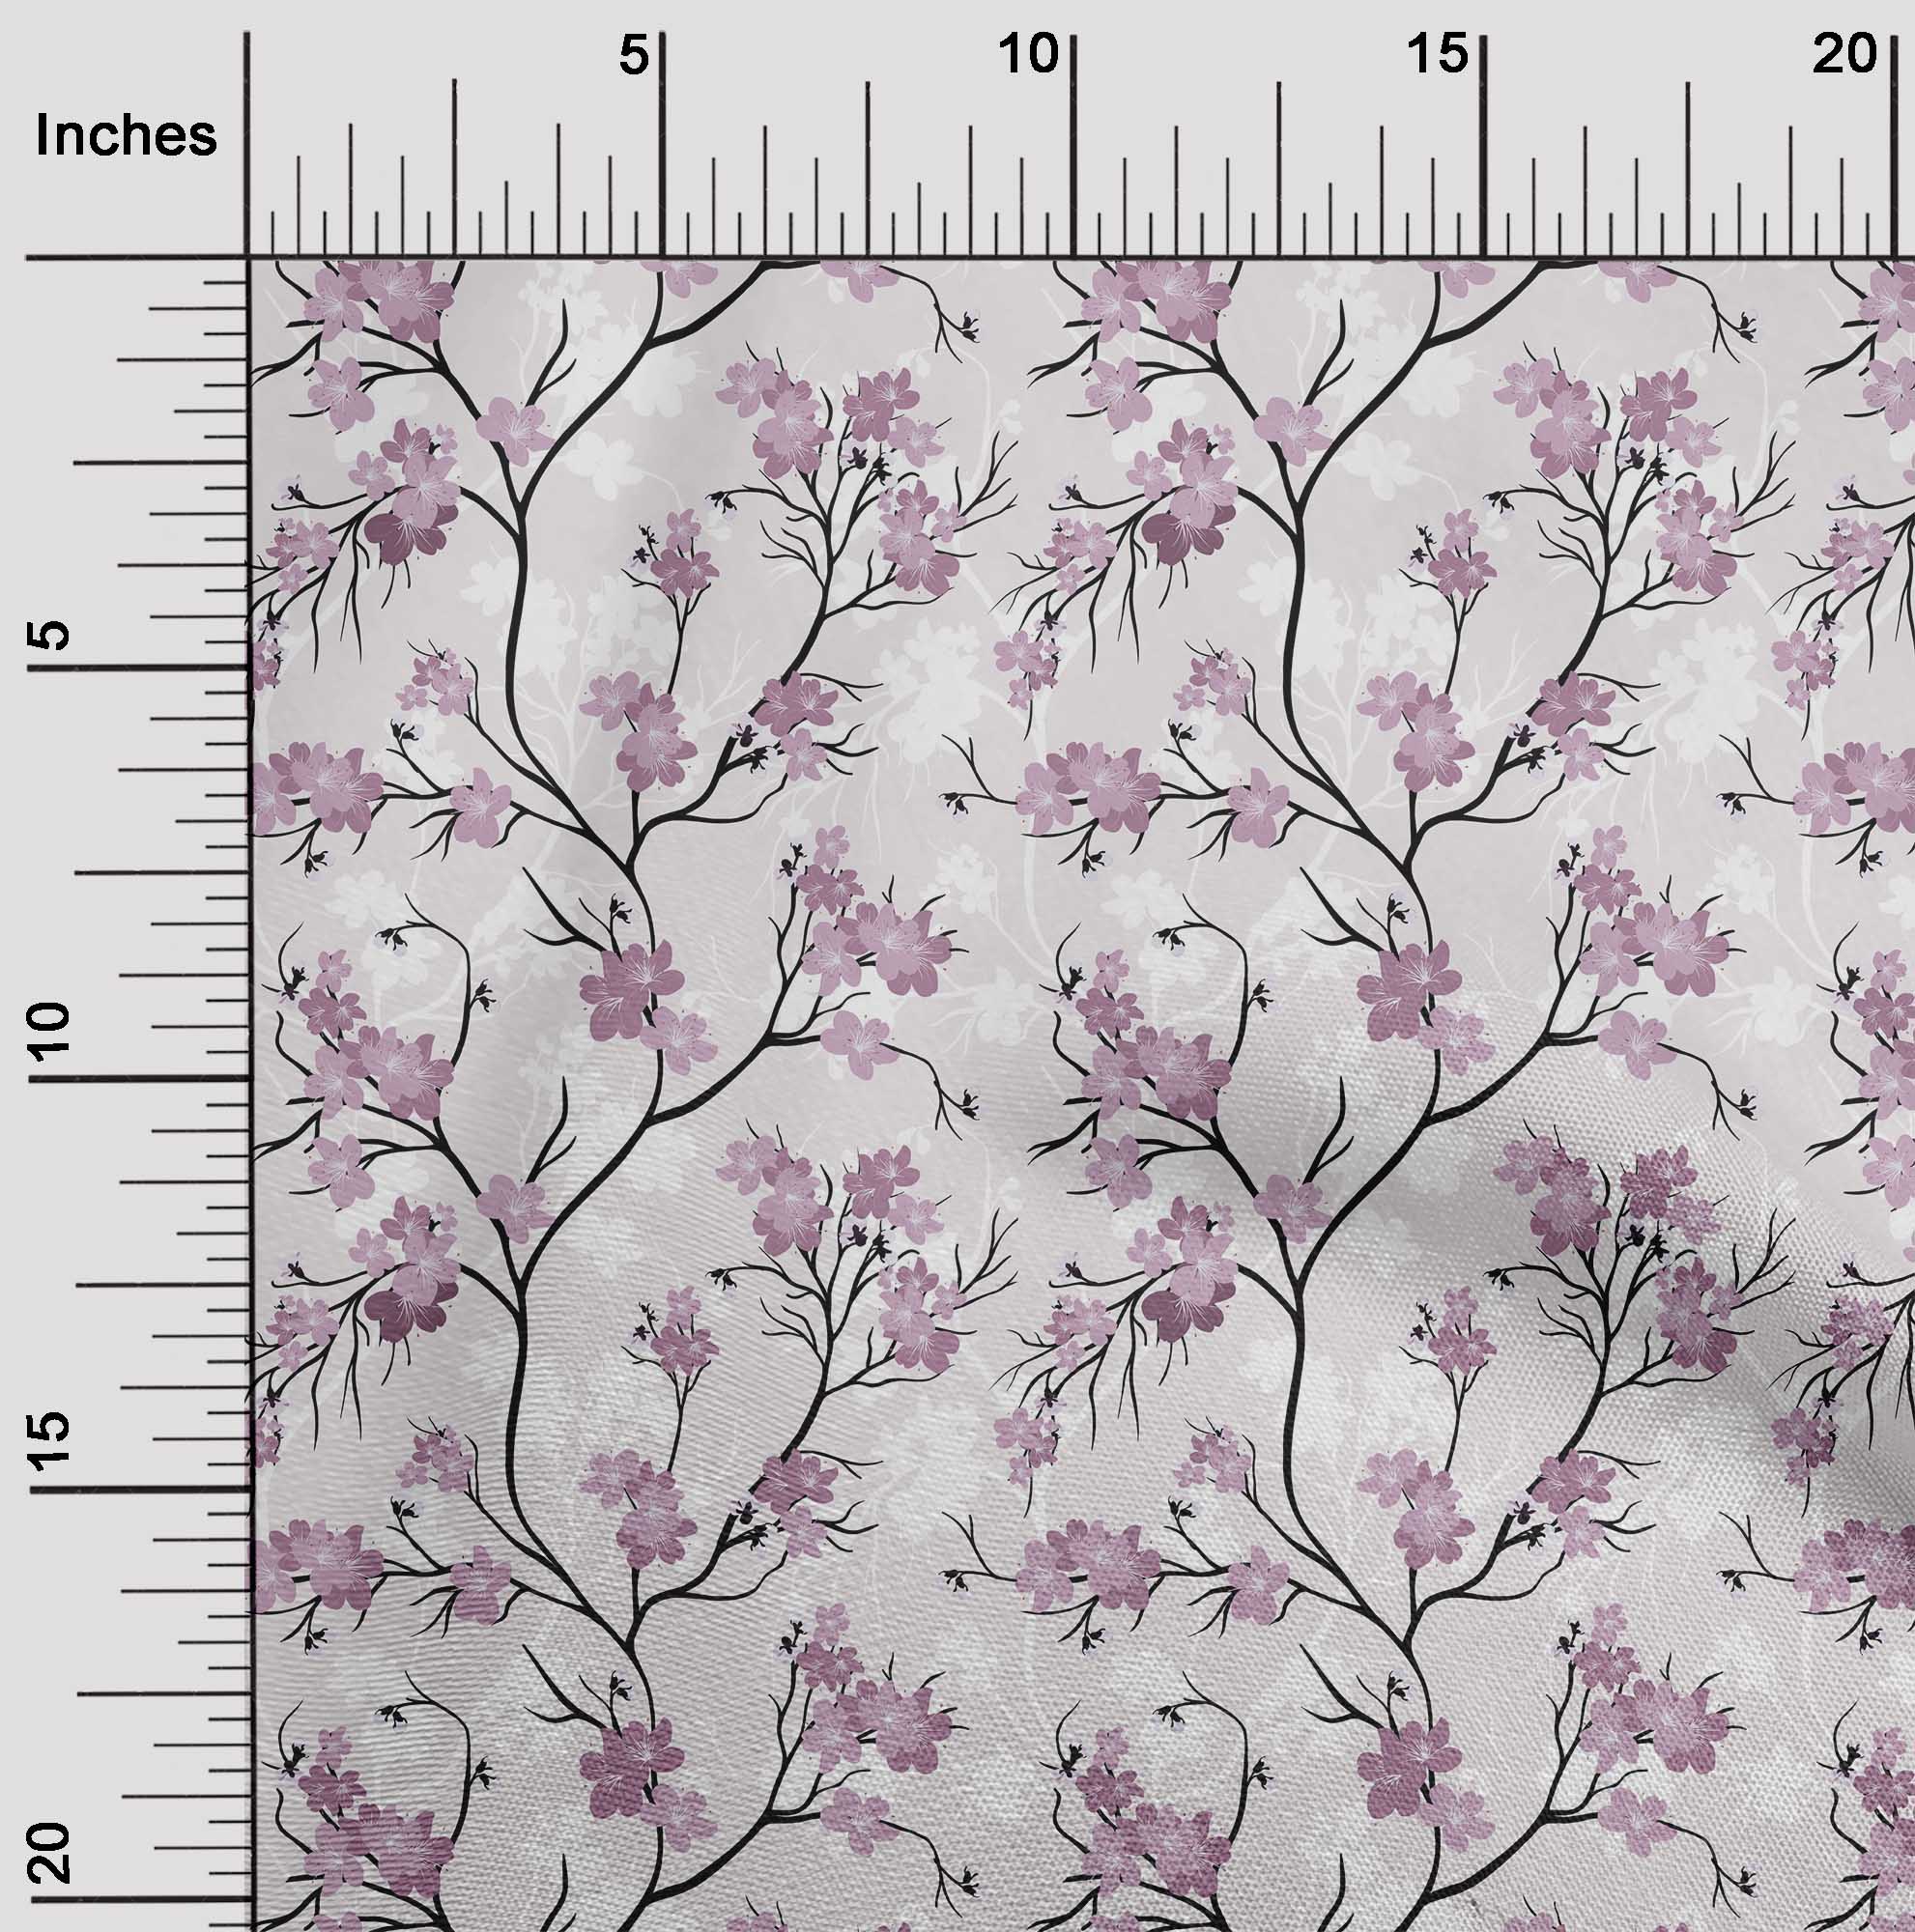 oneOone Cotton Cambric Lavender Fabric Floral Fabric For Sewing Printed Craft Fabric By The Yard 56 Inch Wide - image 2 of 5